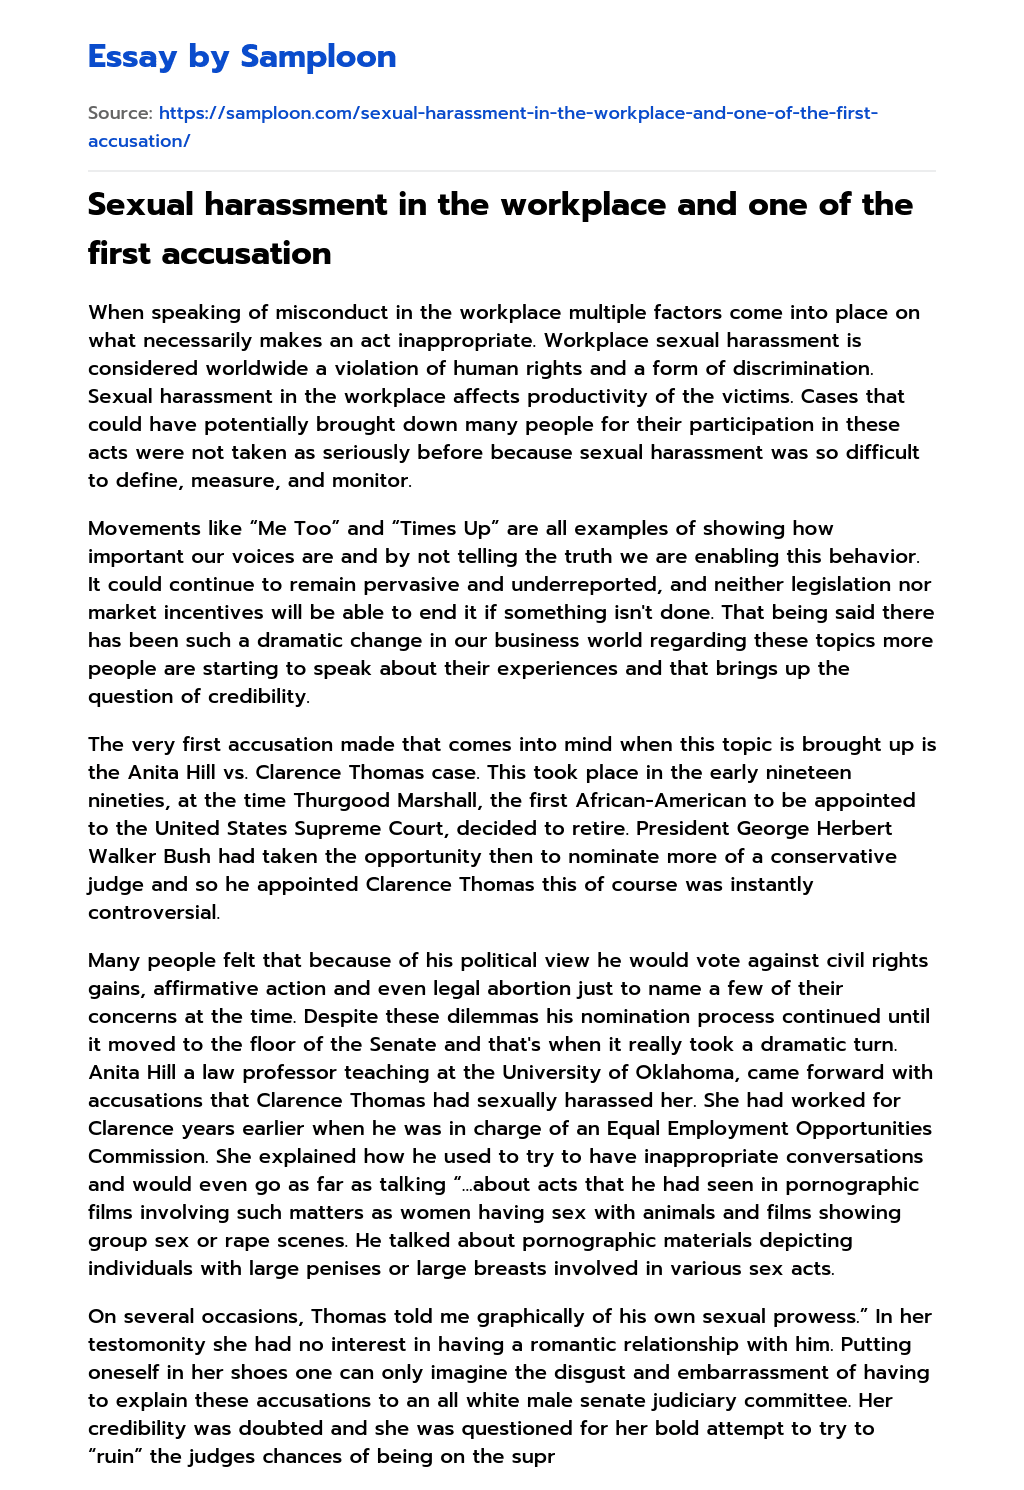 persuasive essay about sexual harassment